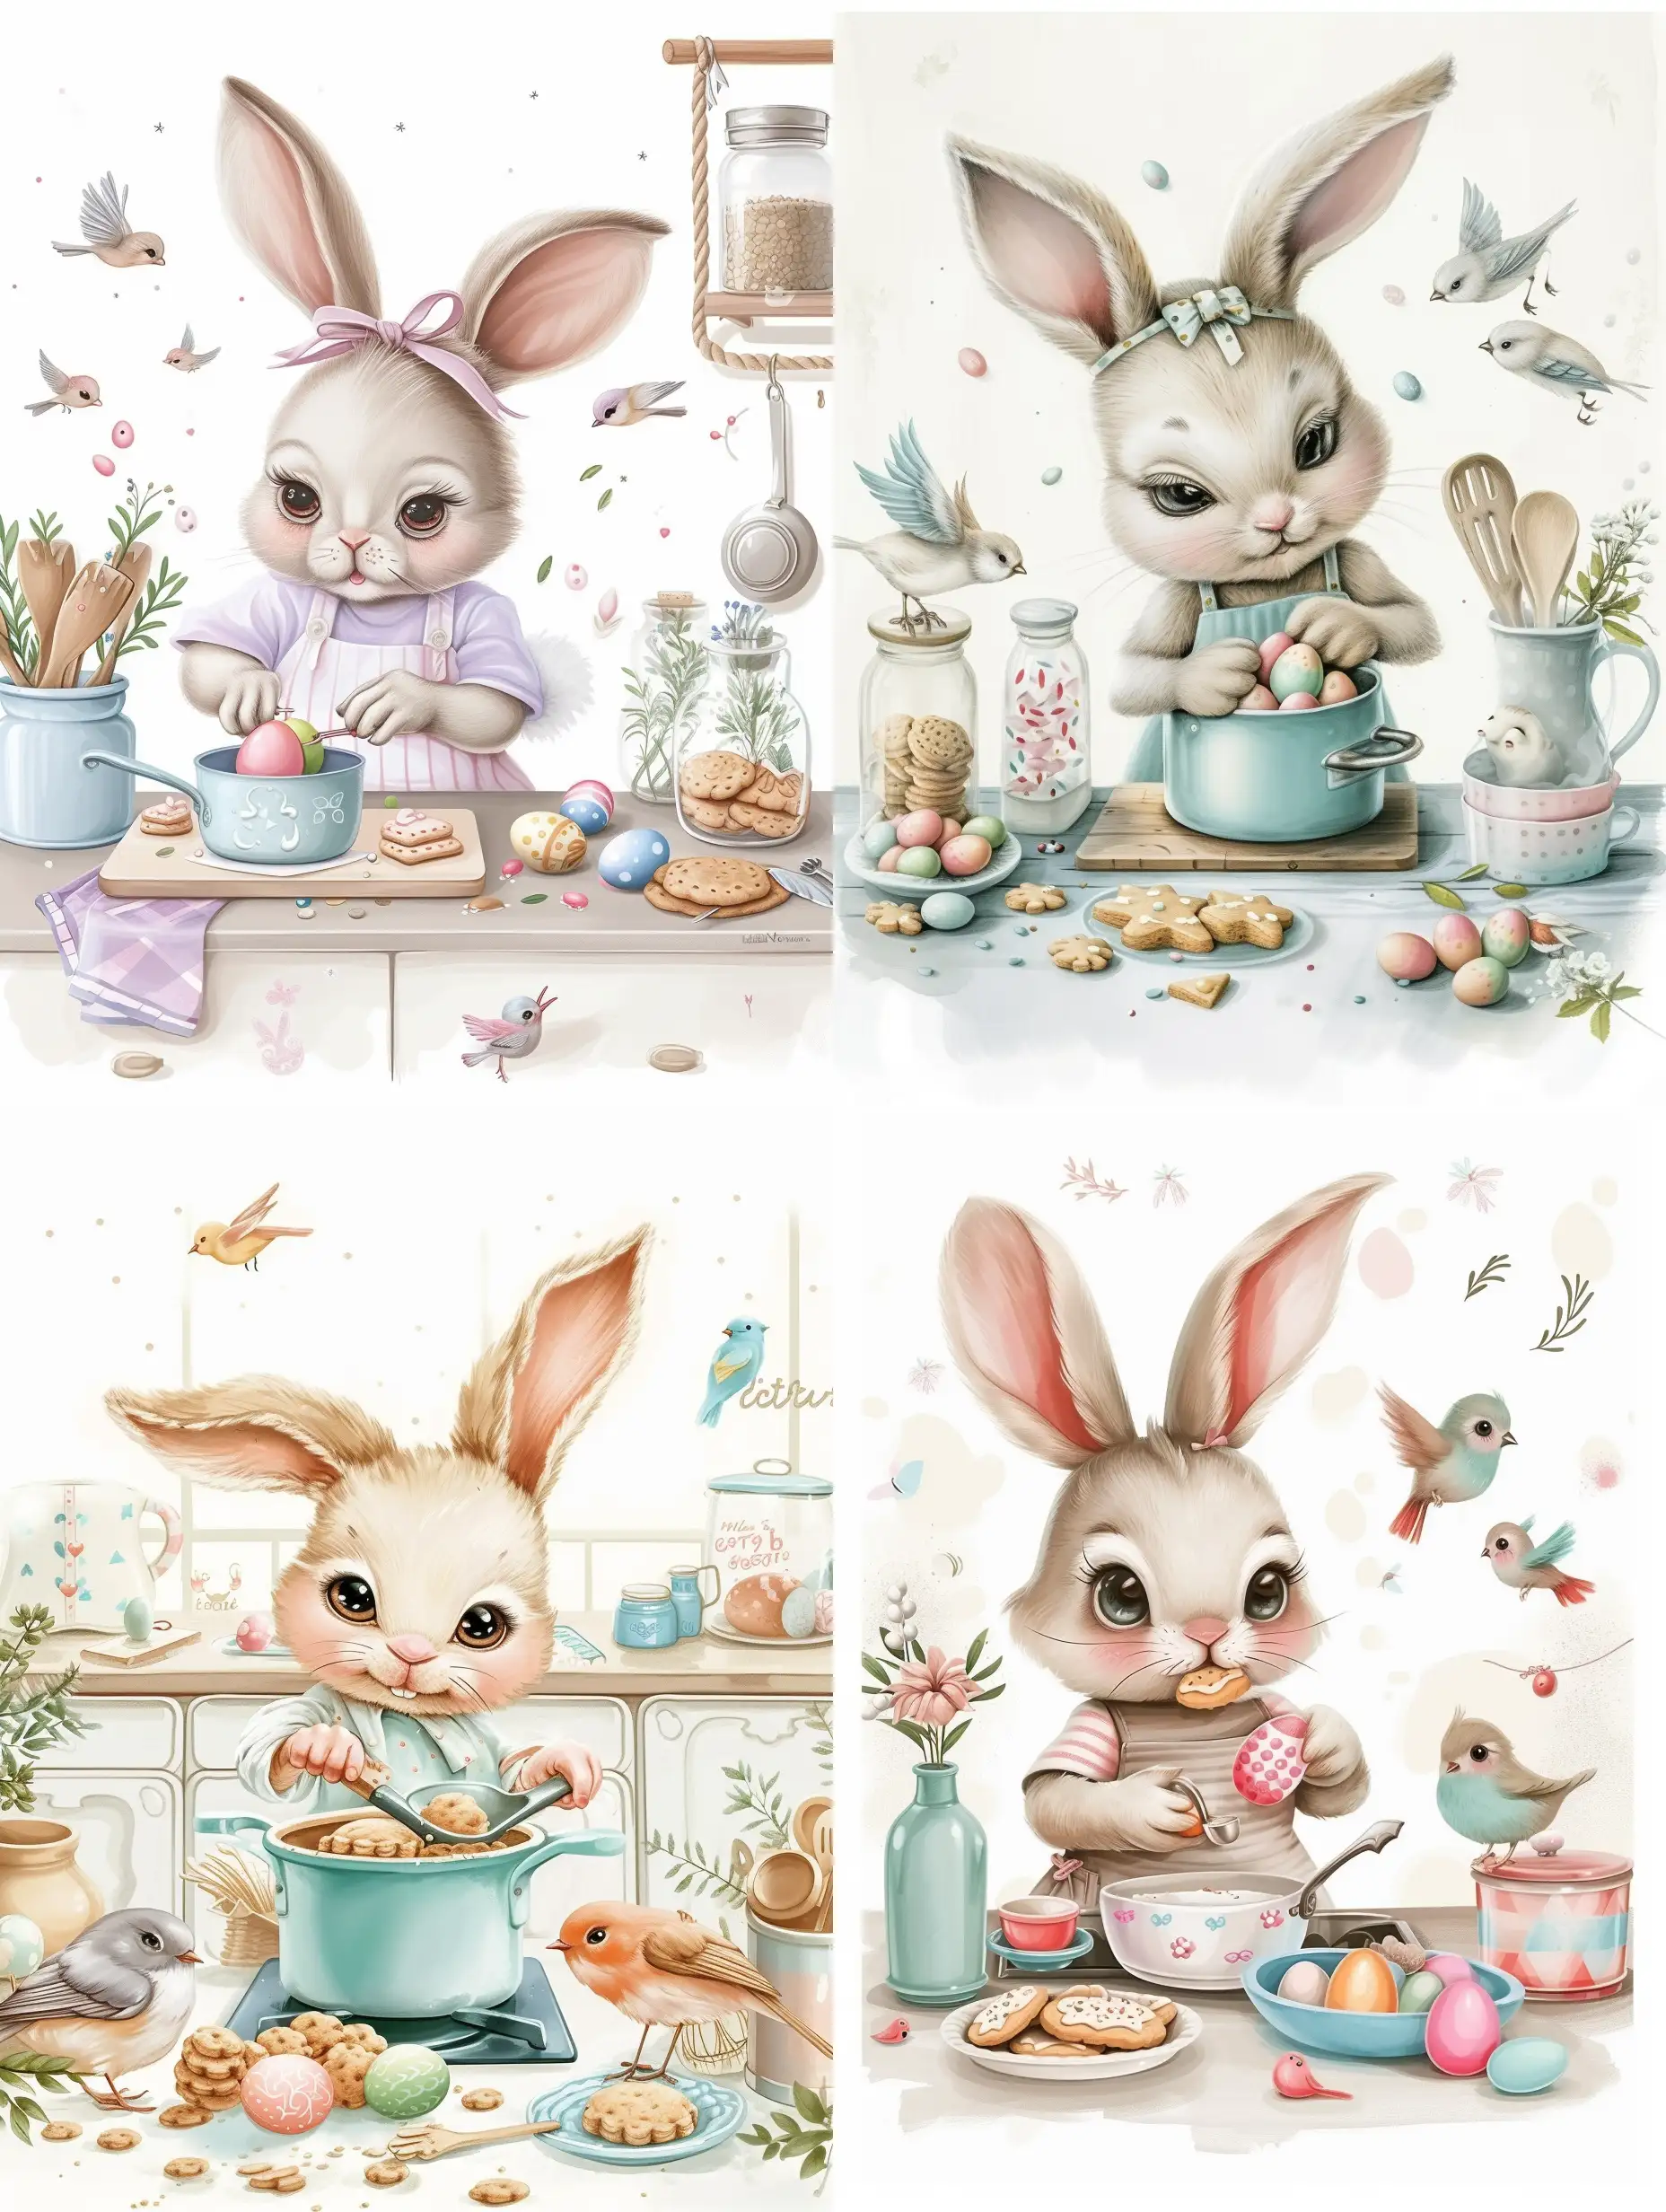 Adorable 2d illustration for a nursery poster of cute baby bunny in the kitchen cooking easter eggs and cookies, cute birds playing around, colorful, pastel colors, white background